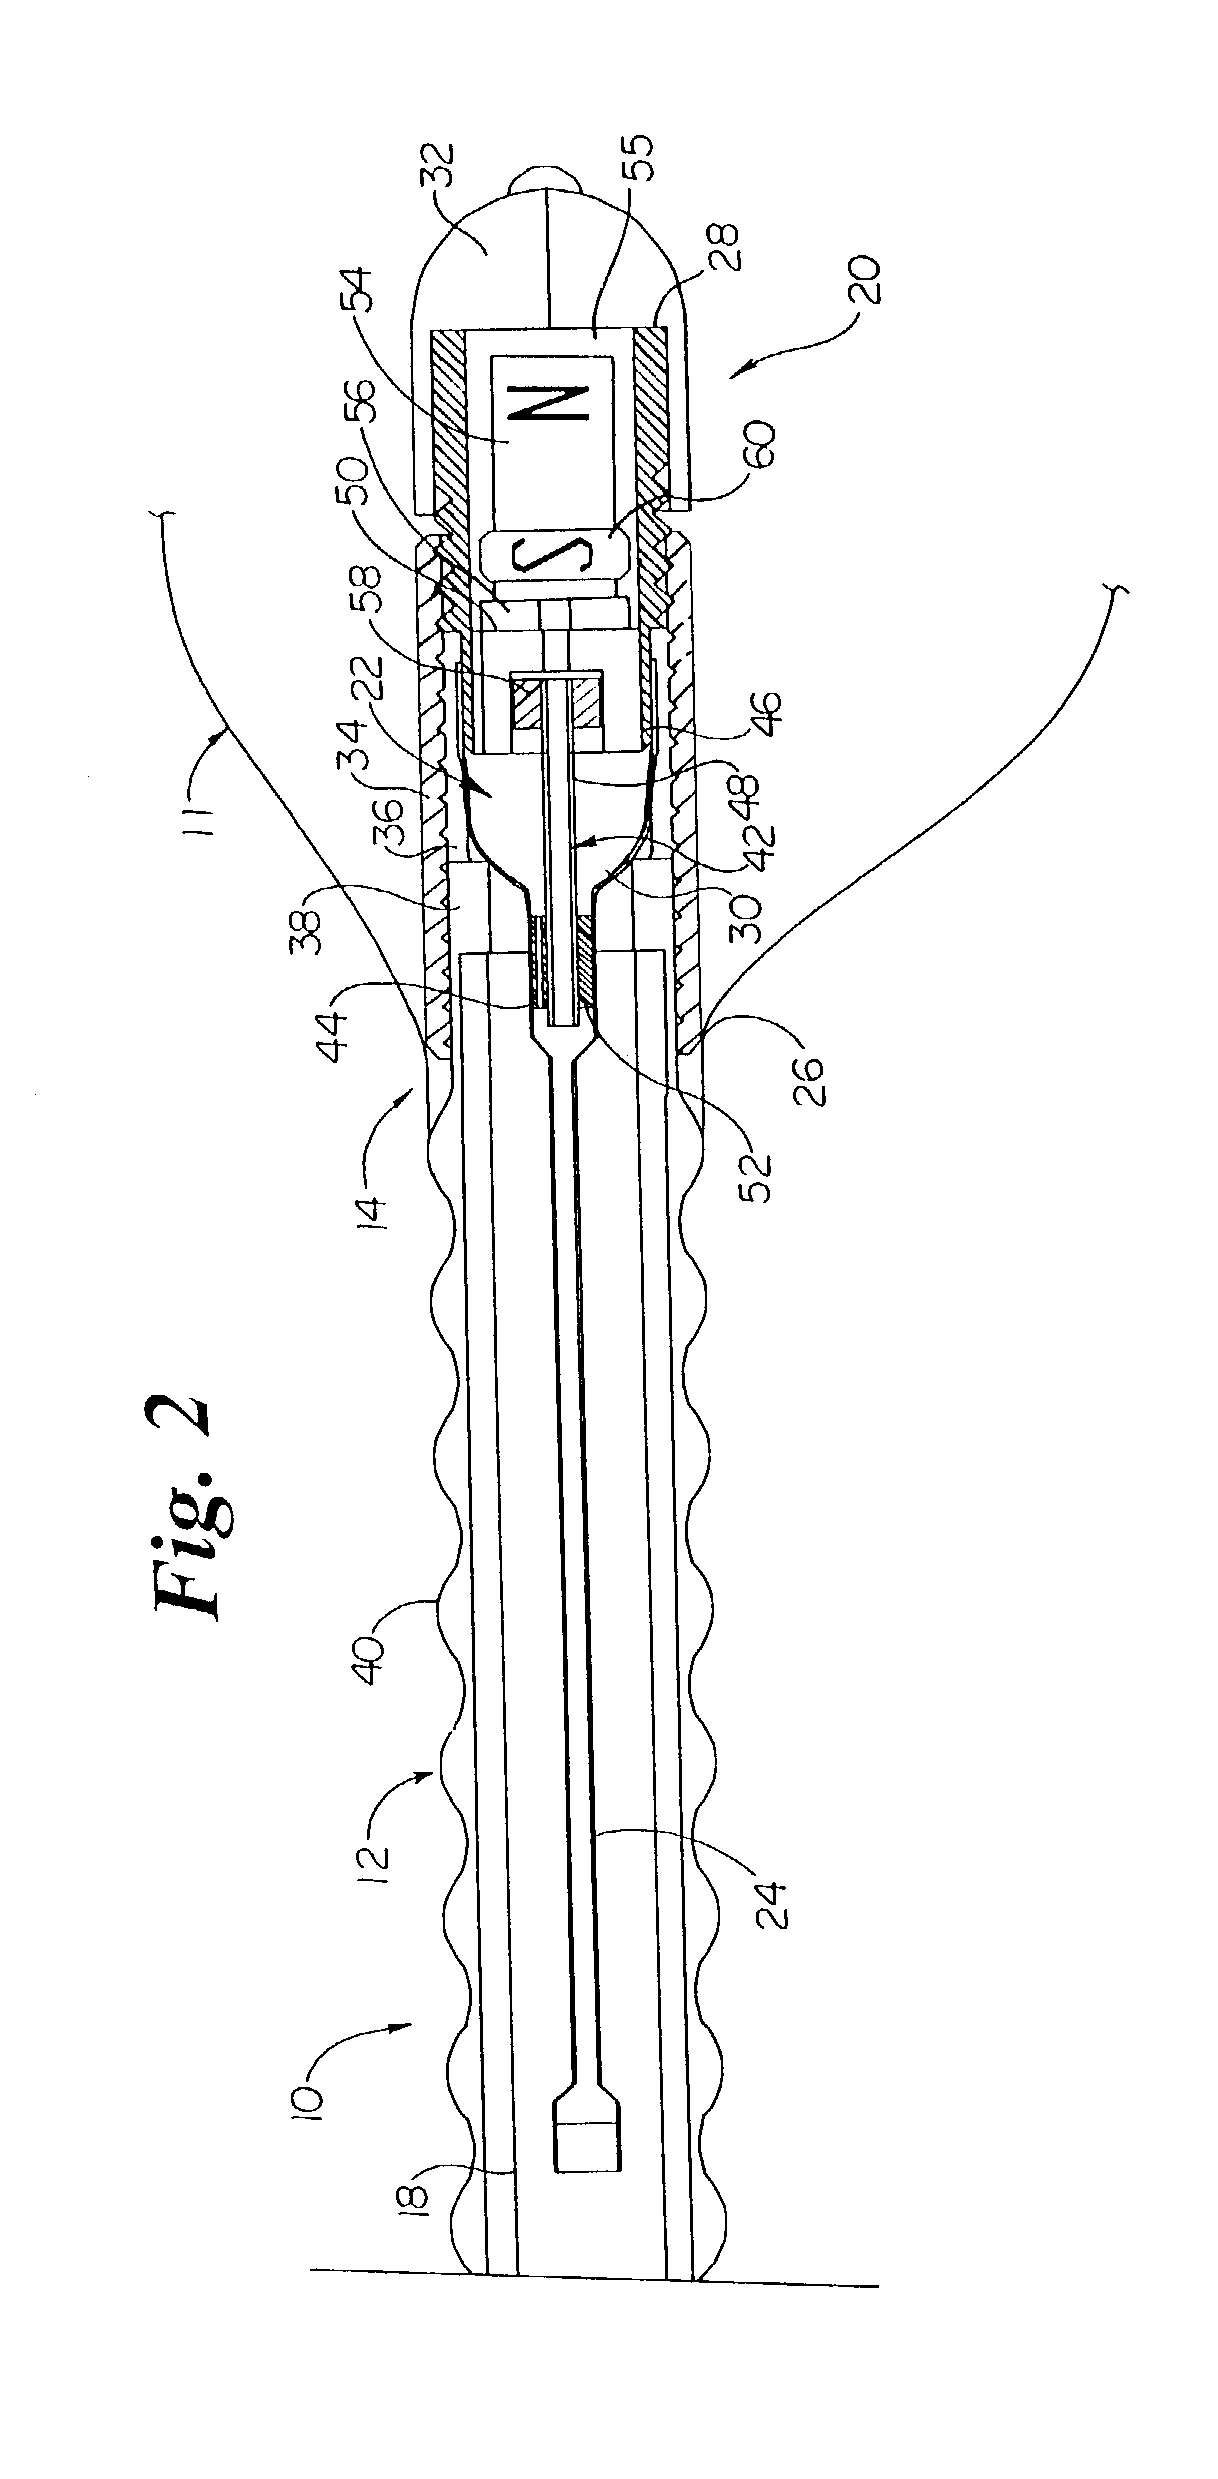 Urinary flow control device and method